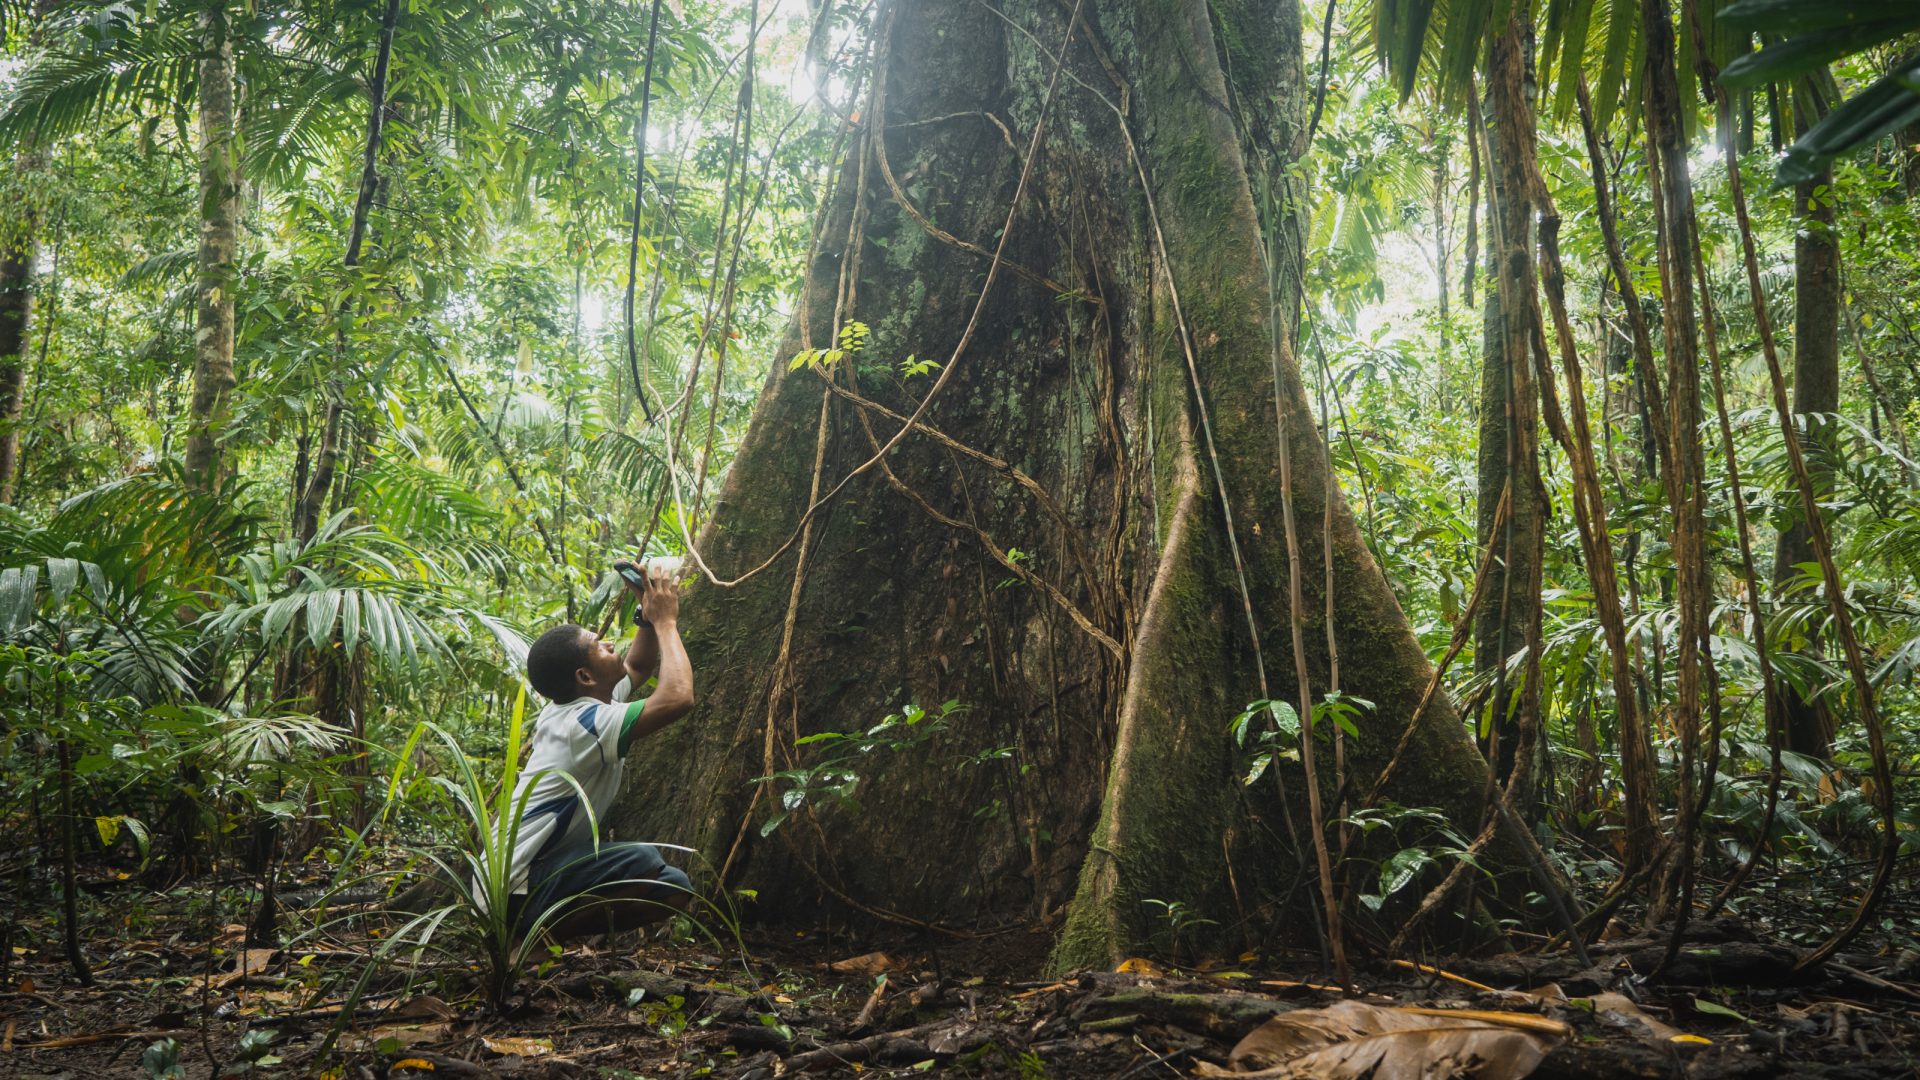 Nicky, Biodiversity Officer, crouches to photograph at the buttress roots of a tree in the Papua New Guinea rainforest.